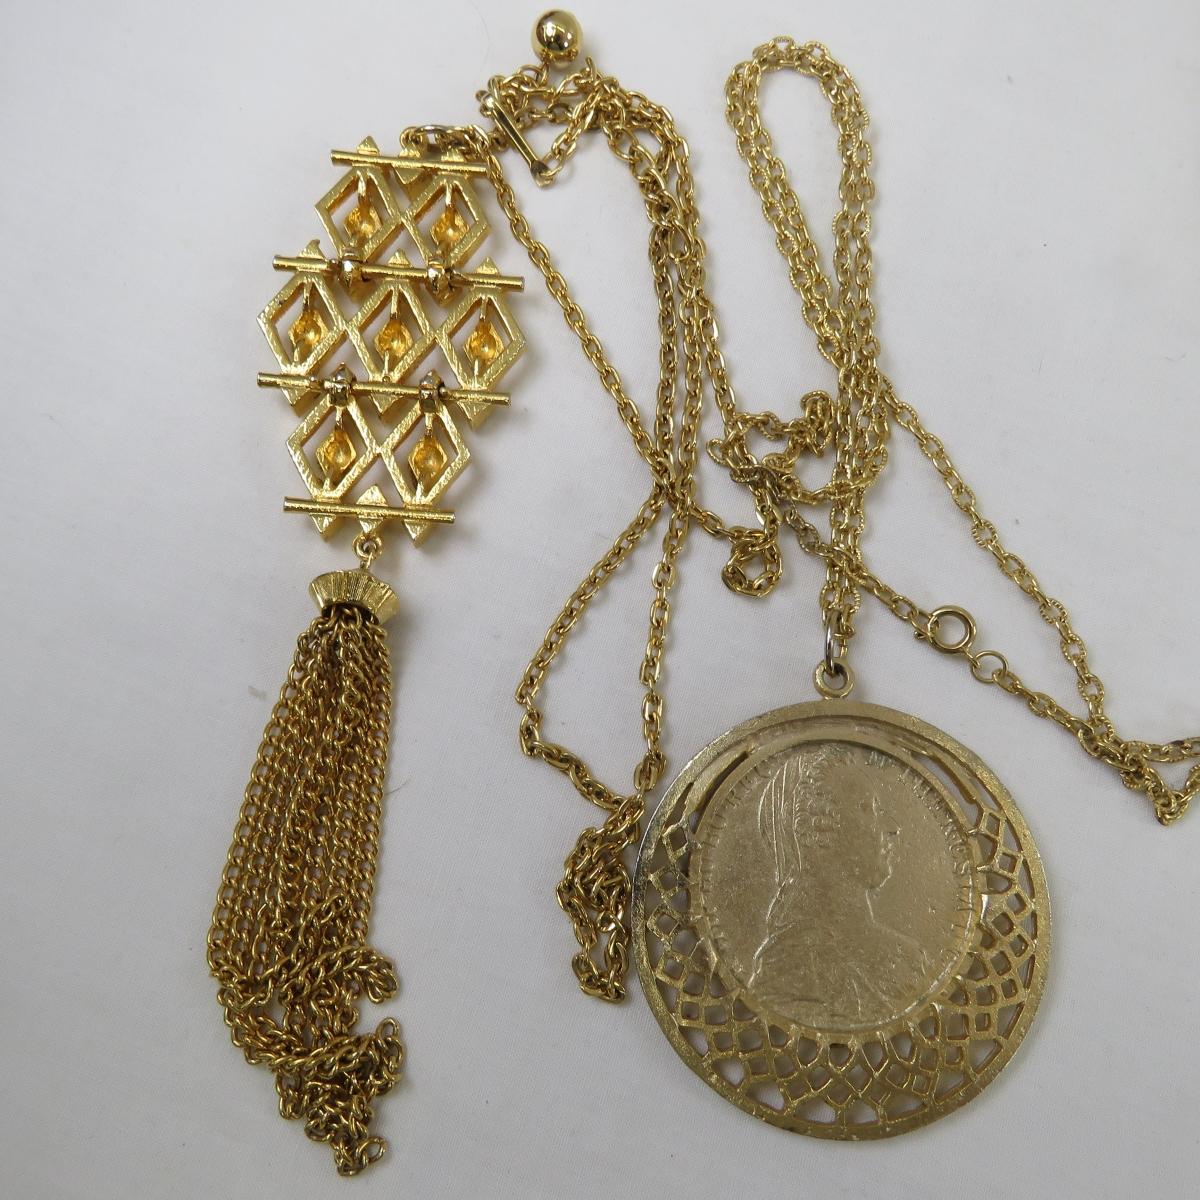 Vintage Givenchy, Warner. Metzke & Other Jewelry